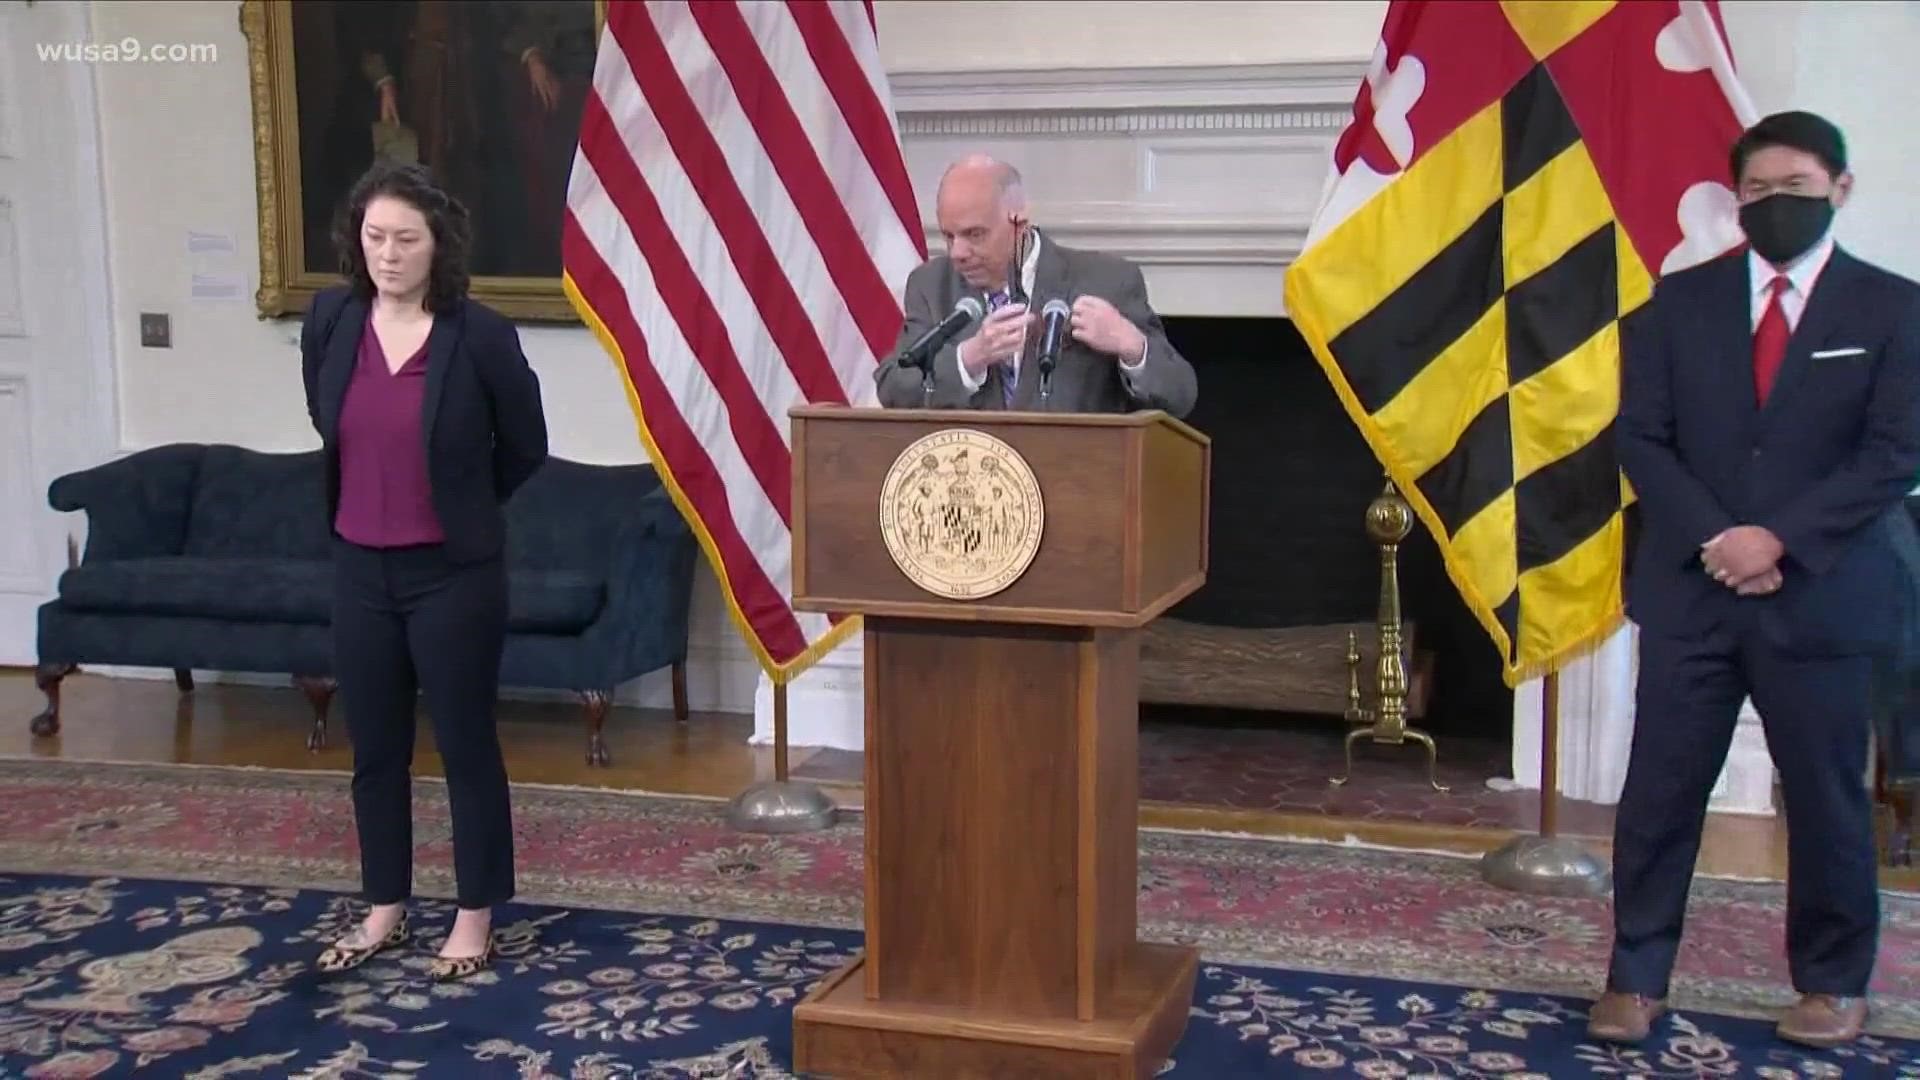 Maryland Gov. Hogan announces the creation of an Asian American Hate Crimes workgroup. Former U.S. Attorney Robert Hur will serve as Chairman of the group.